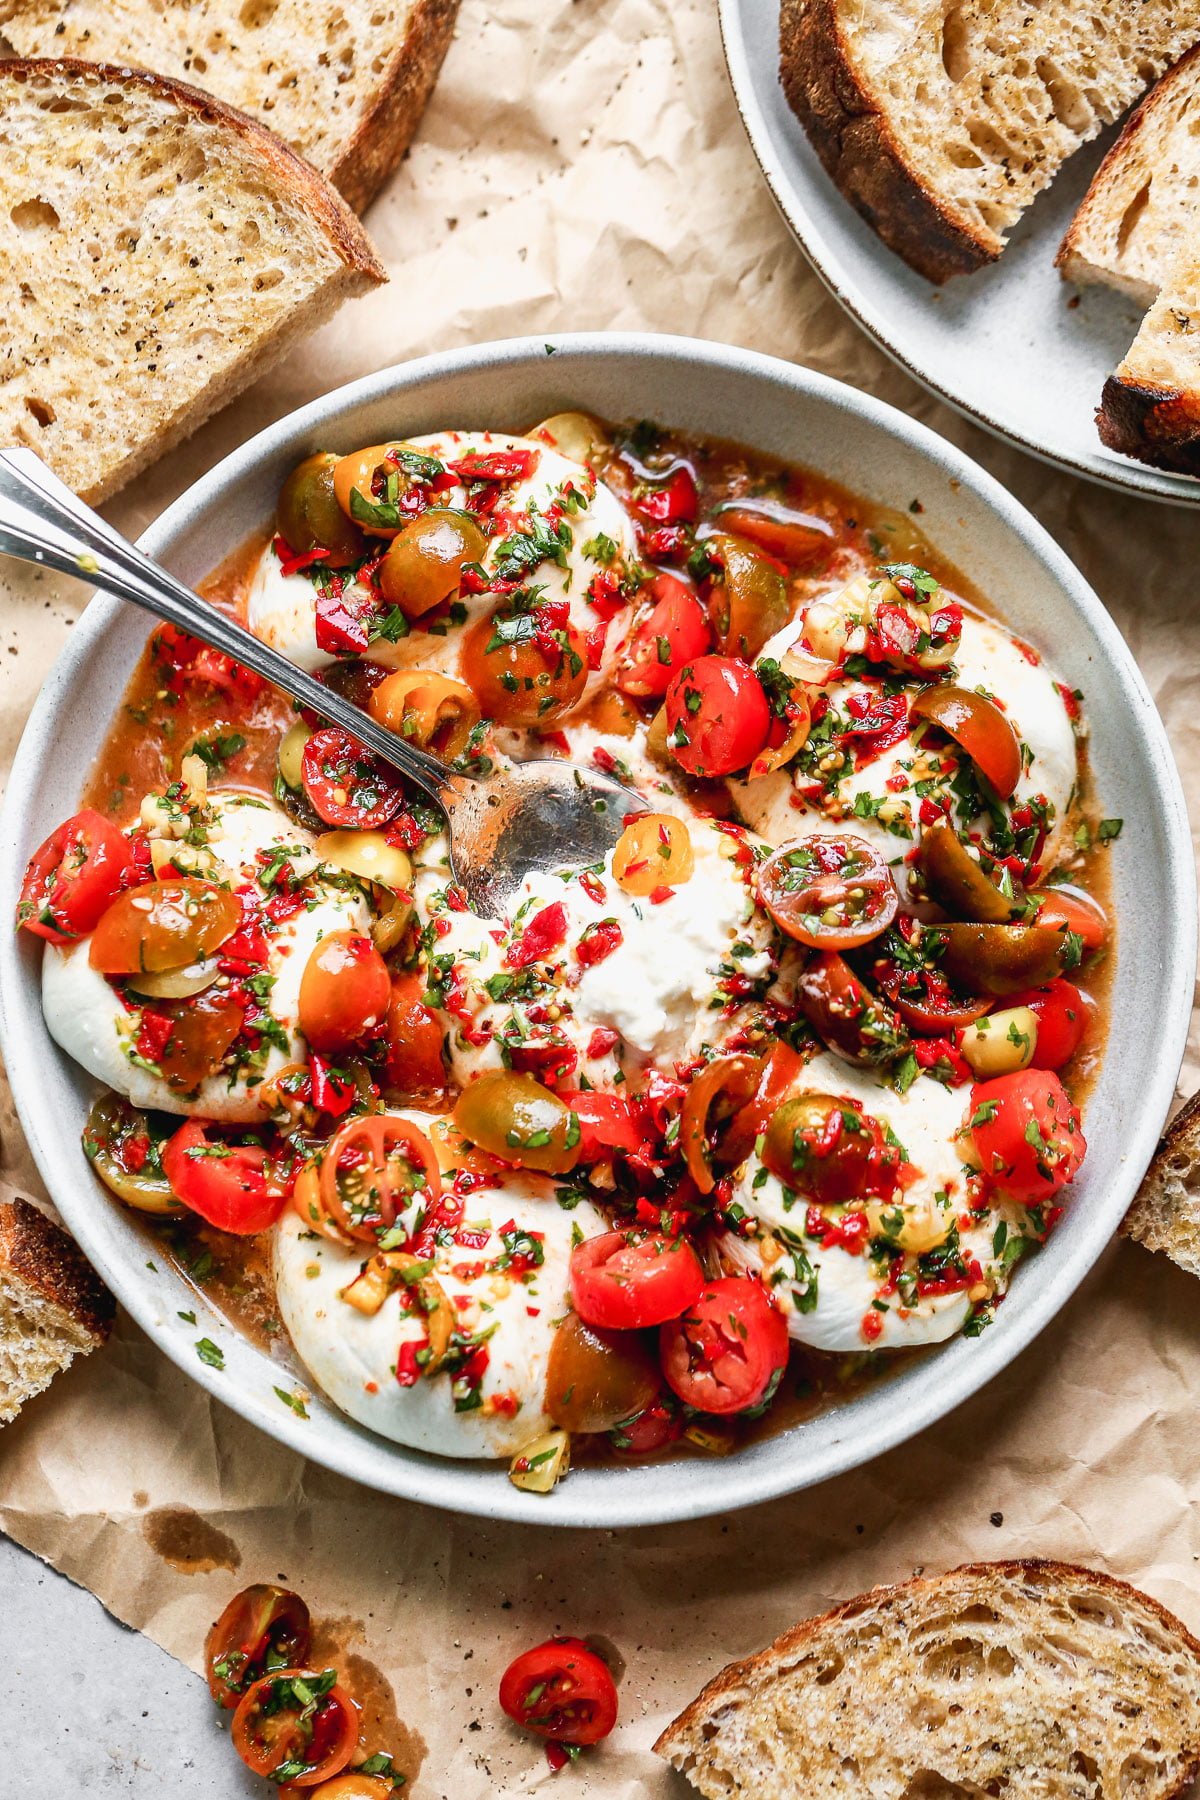 This Calabrian Chili and Burrata Appetizer is going to be the star of all your summer gatherings. This is basically a classic bruschetta but so so much better. We take juicy heirloom cherry tomatoes and toss them with fiery calabrian chilis, zippy red wine vinegar, parsley, garlic, and a few briny capers. We spoon it over the most adorable mini creamy burrata balls and serve with crusty bread to soak up every juicy bite. 